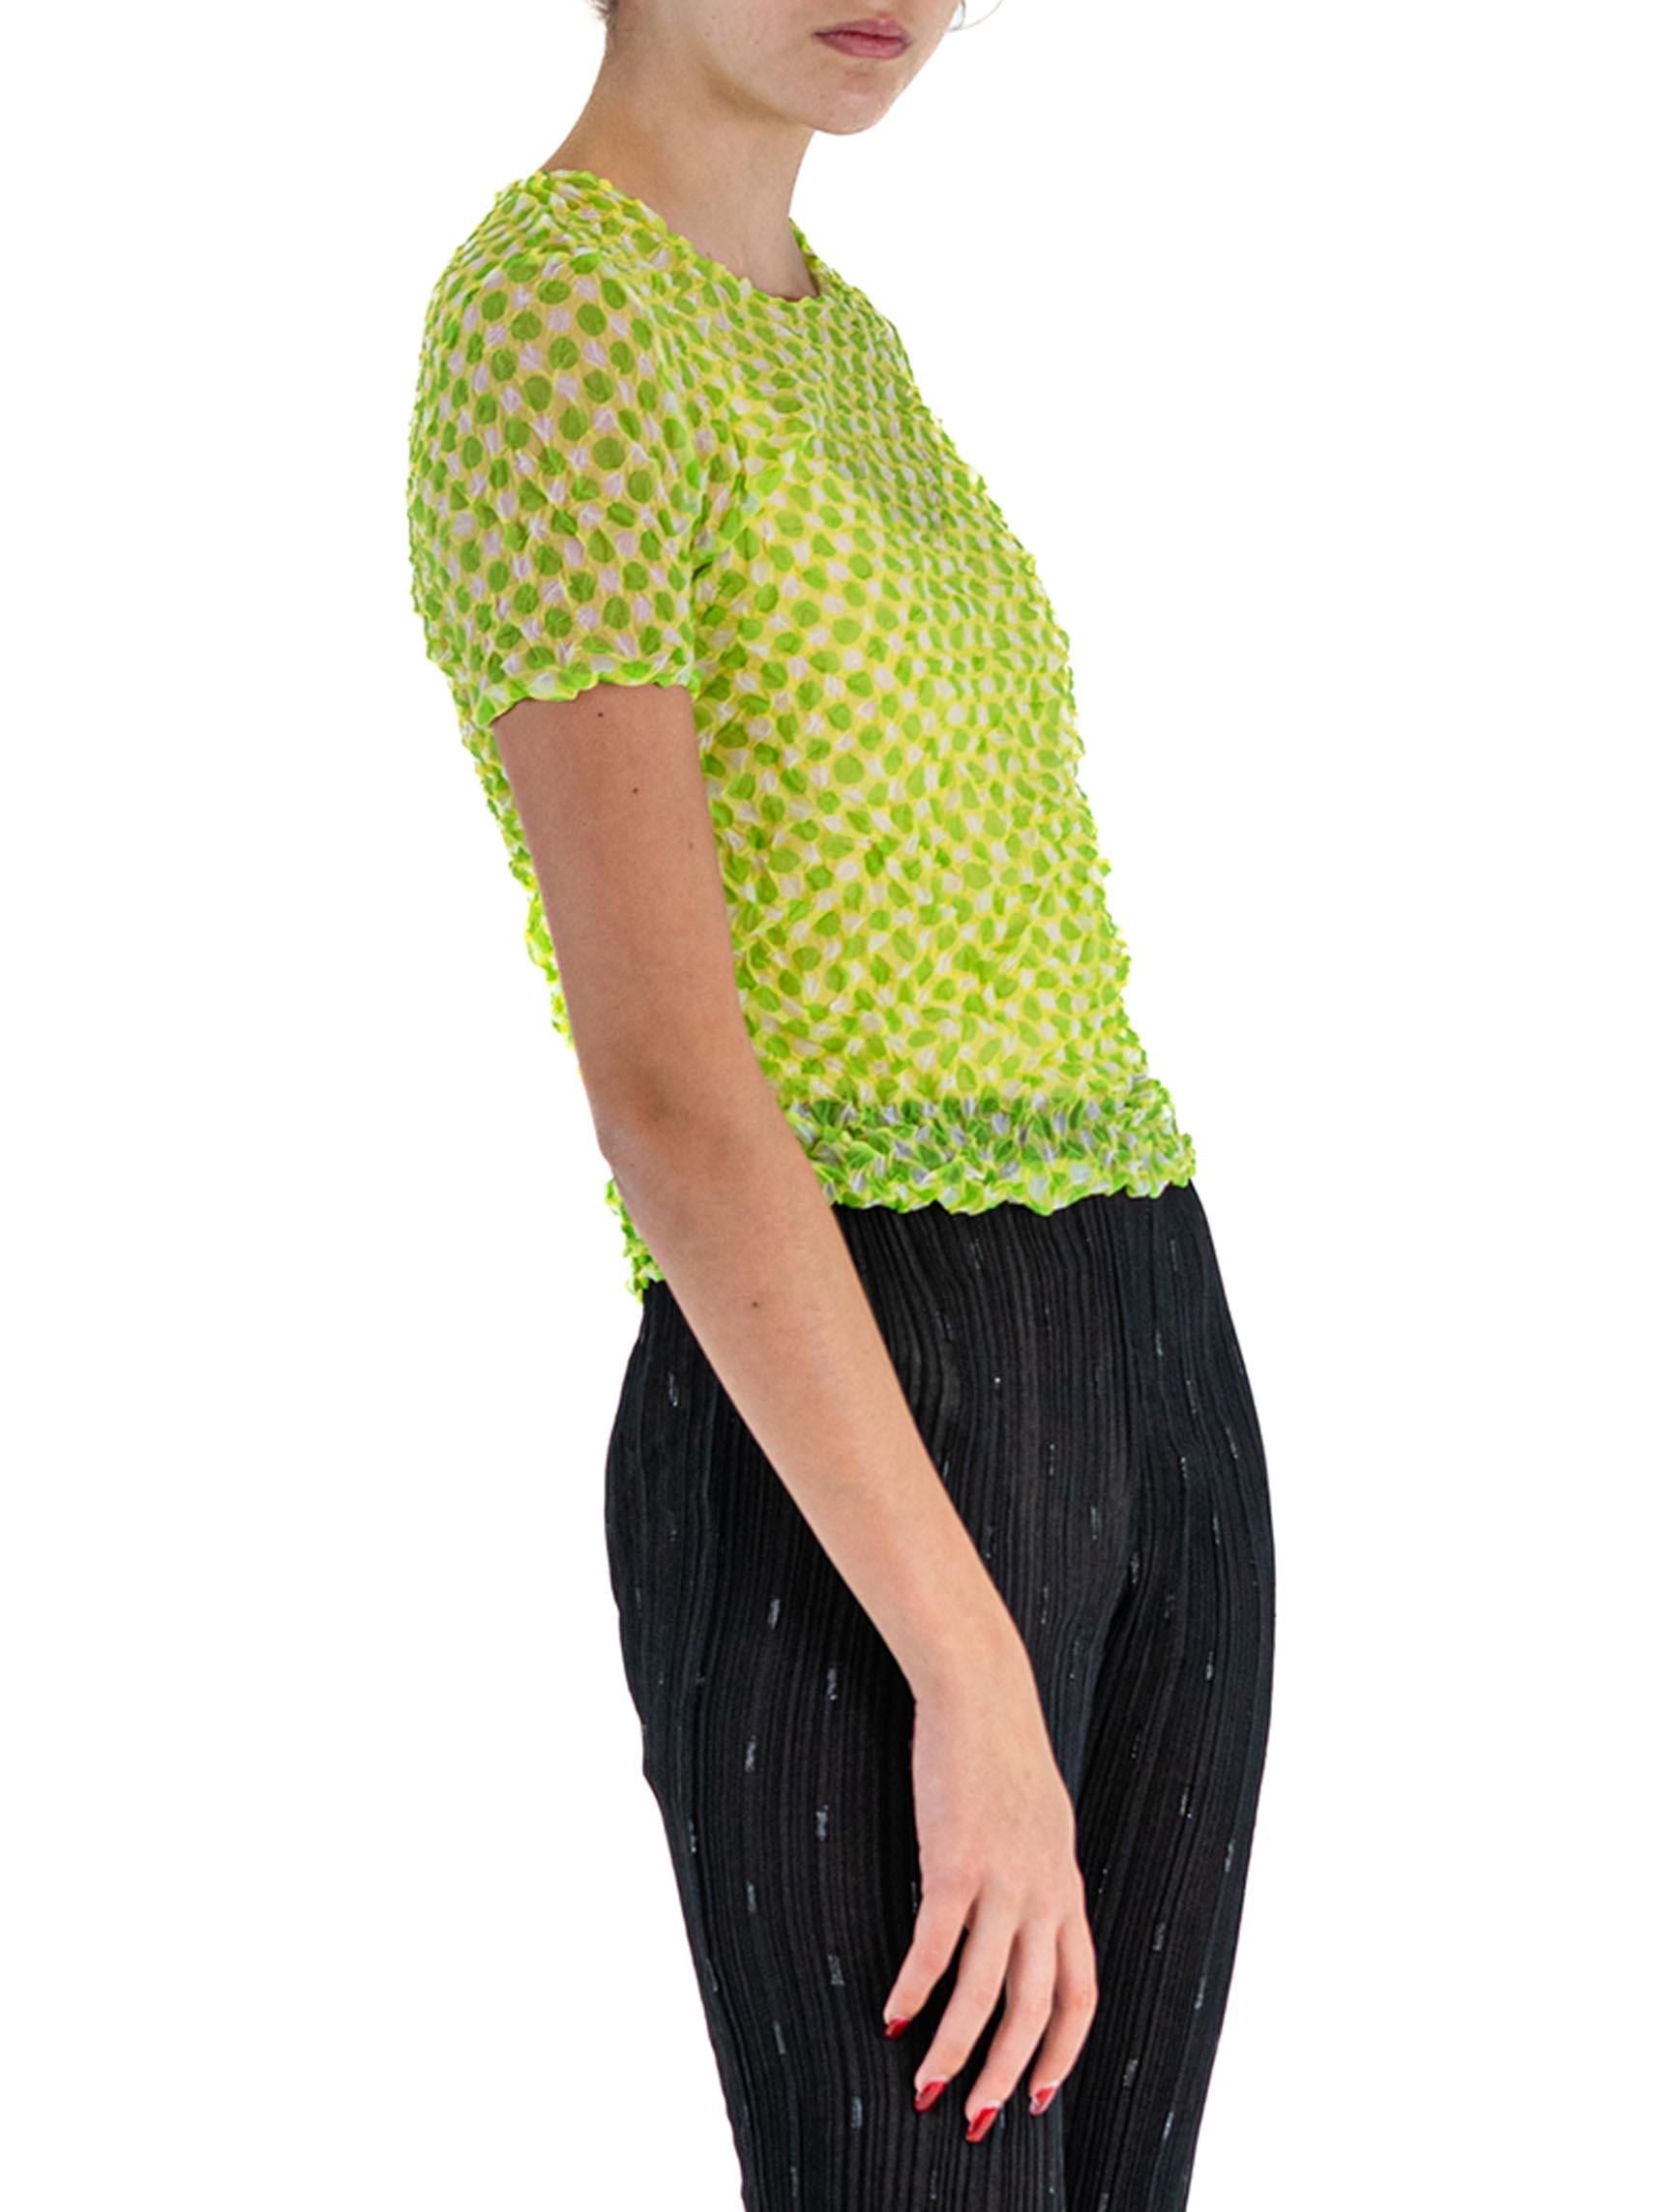 1990S ISSEY MIYAKE Lime Green Sheer Polyester Shrink Wrap Top With Polka Dots For Sale 1